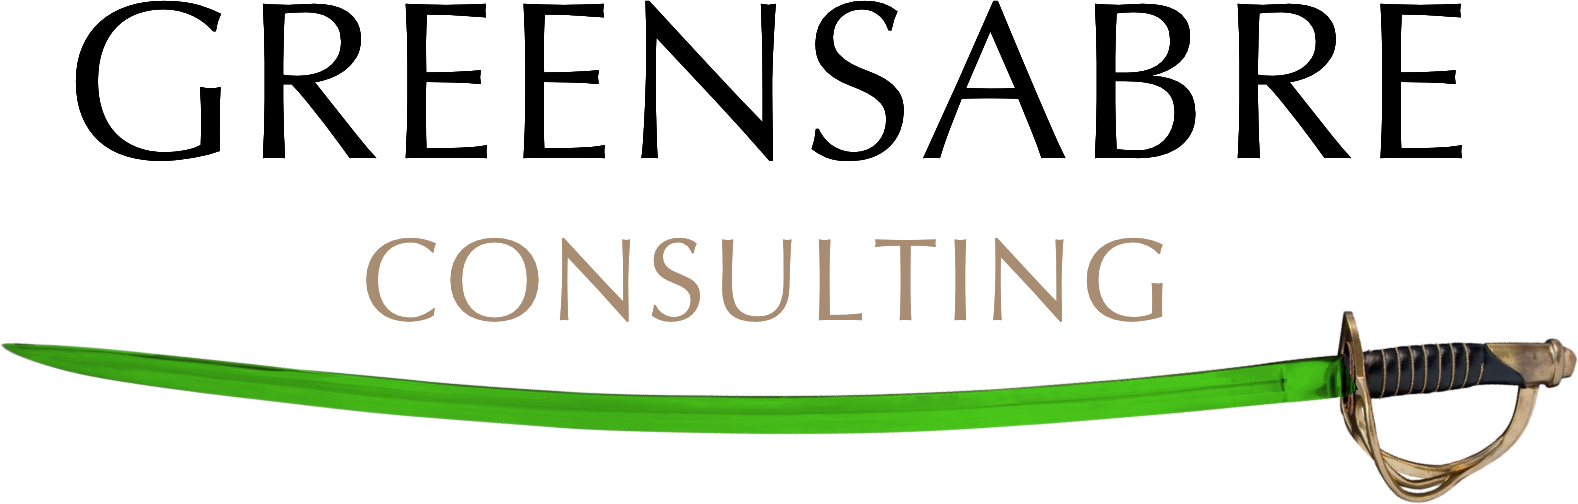 GreensabreConsulting